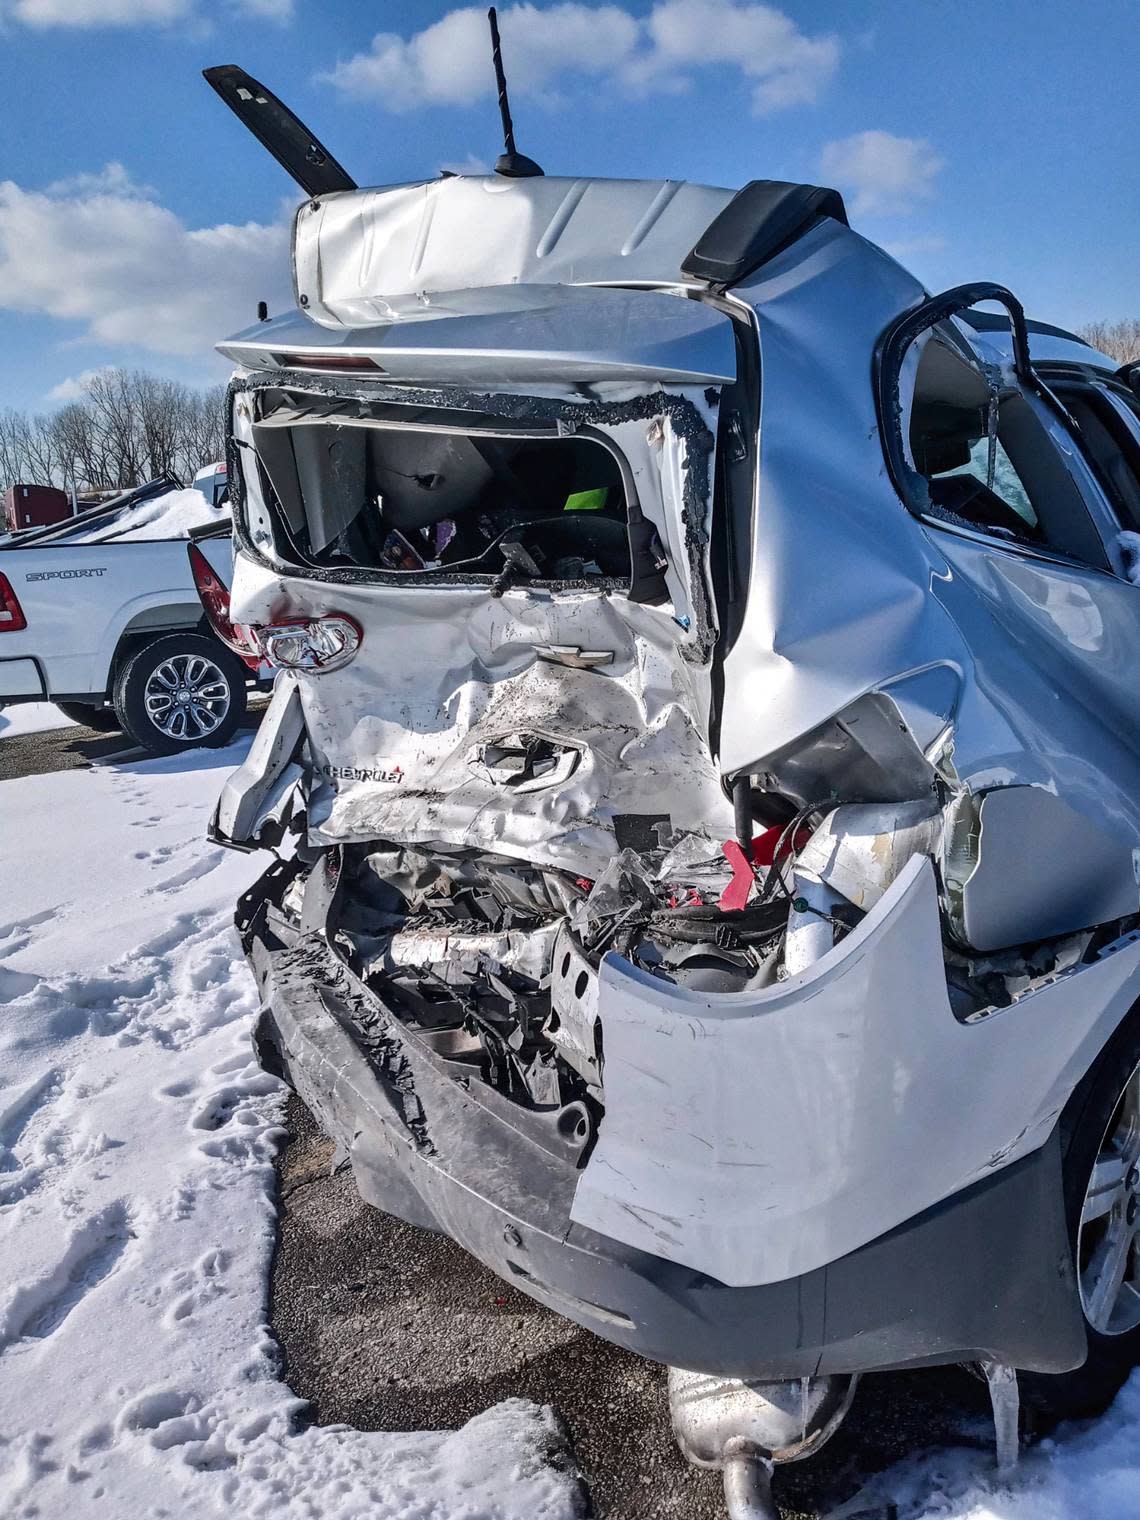 The severely damaged car 5-year-old Ariel Young was in when then-Chiefs linebacker coach Britt Reid slammed his pickup truck into it days before the Super Bowl sat in a snow-covered impound lot shortly after the wreck.